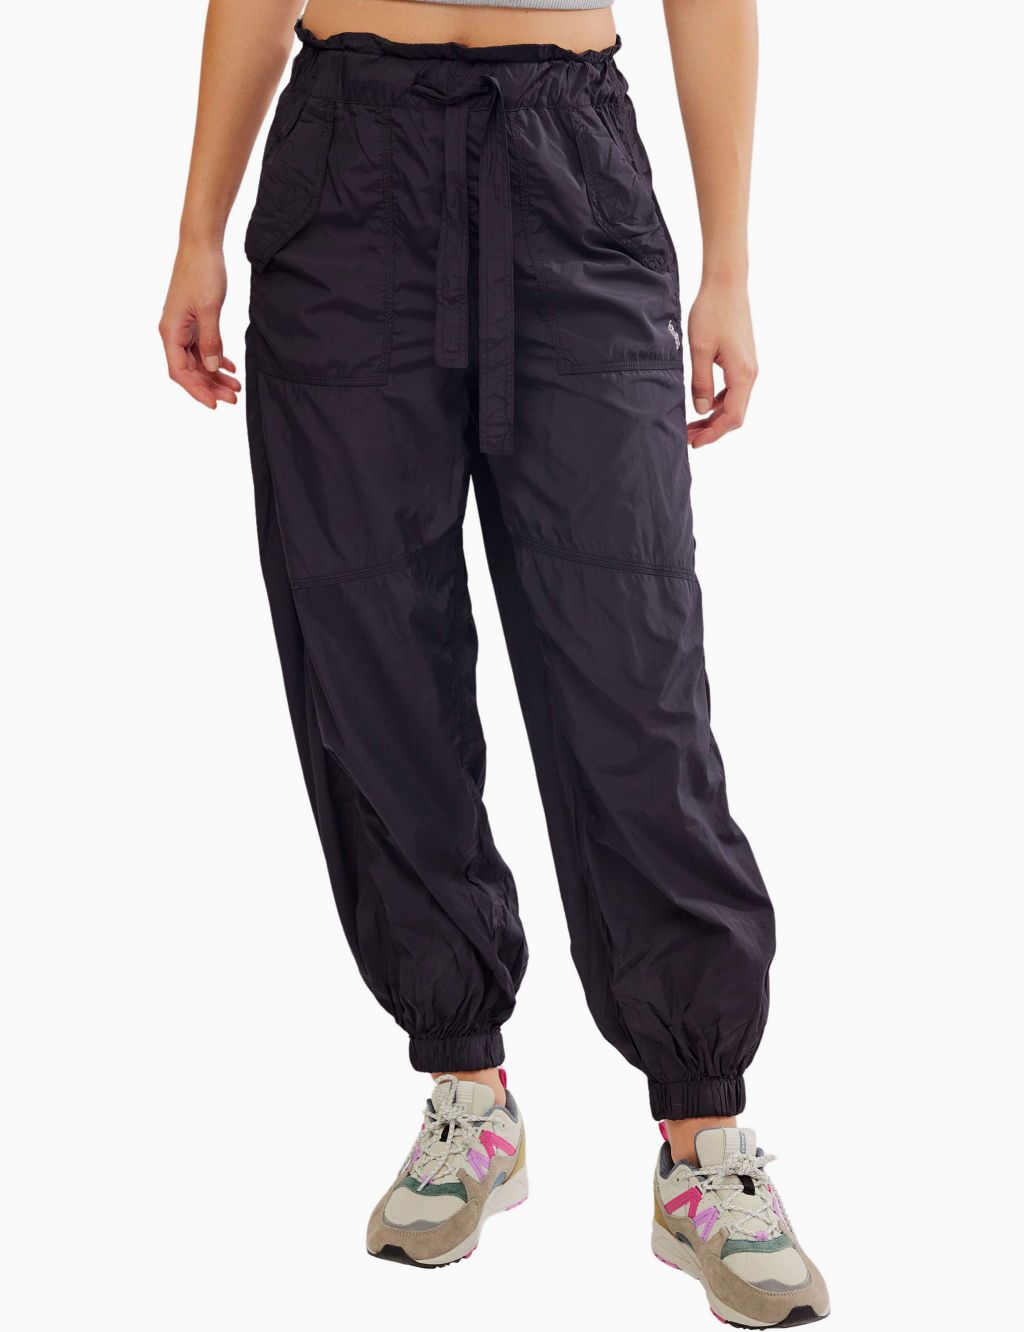 Into The Woods Cuffed High Waisted Joggers